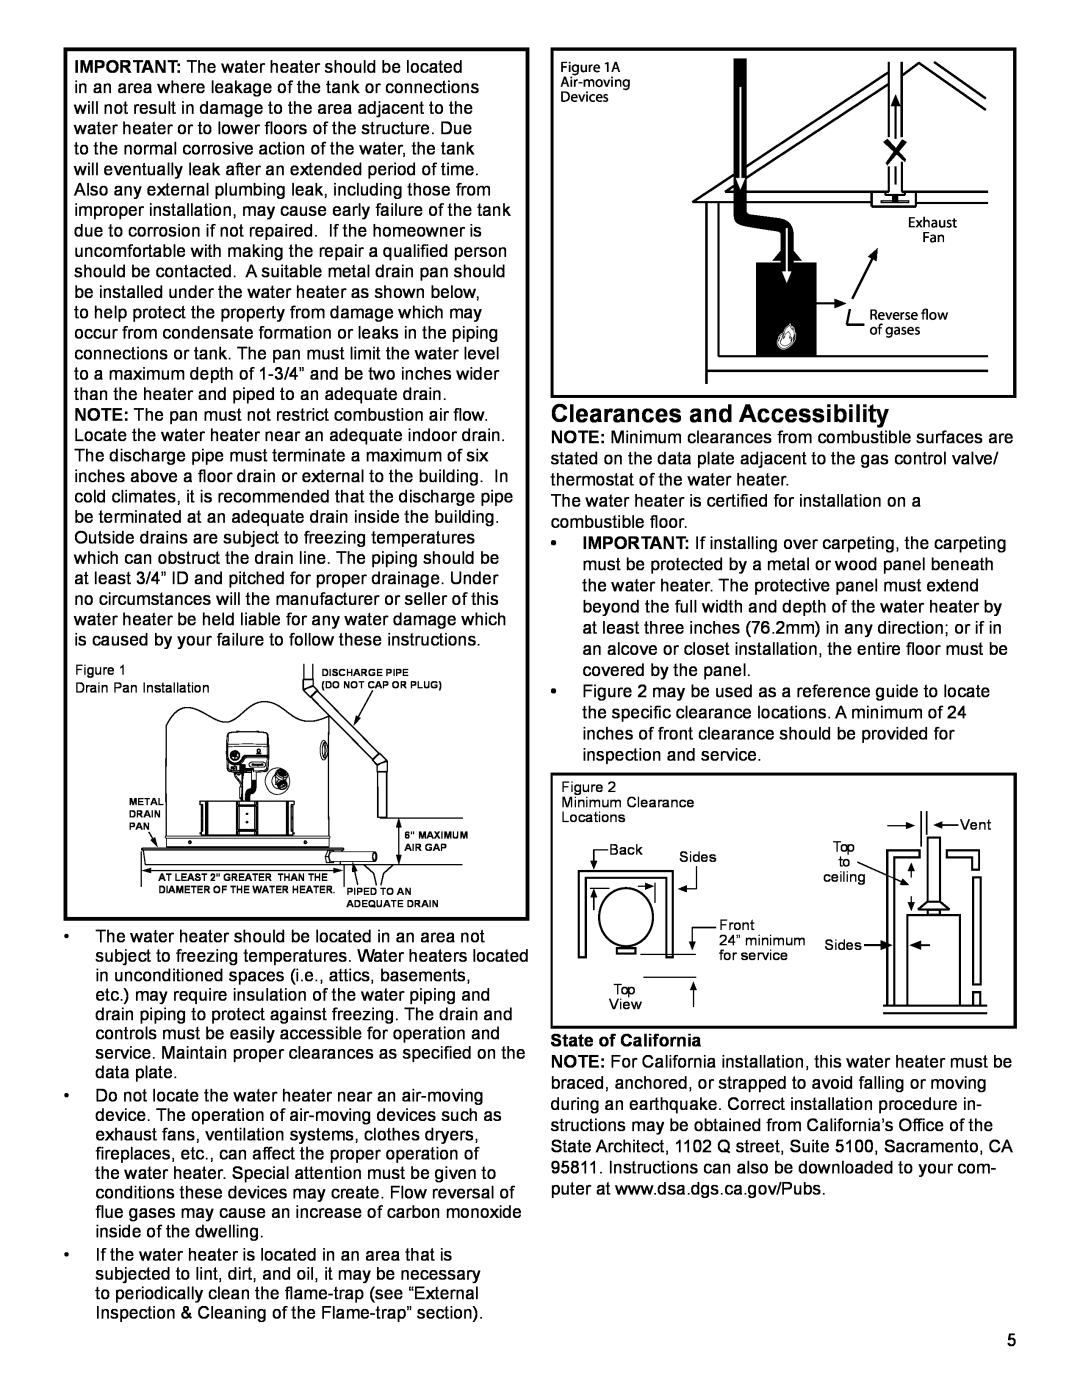 American Water Heater 318935-003 installation instructions Clearances and Accessibility, State of California 